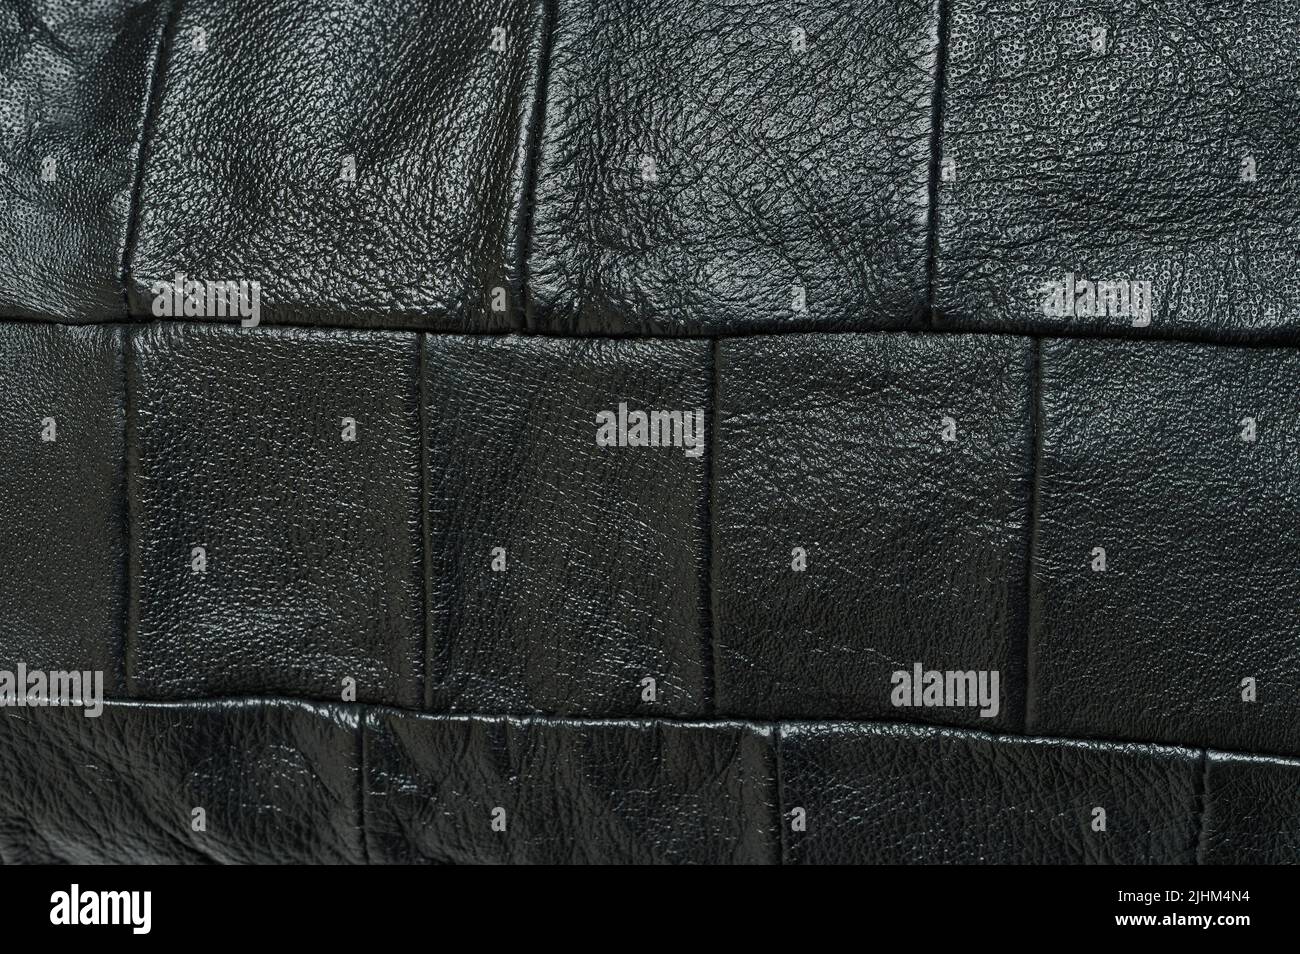 Pressed black leather pattern abstract background close up view Stock Photo